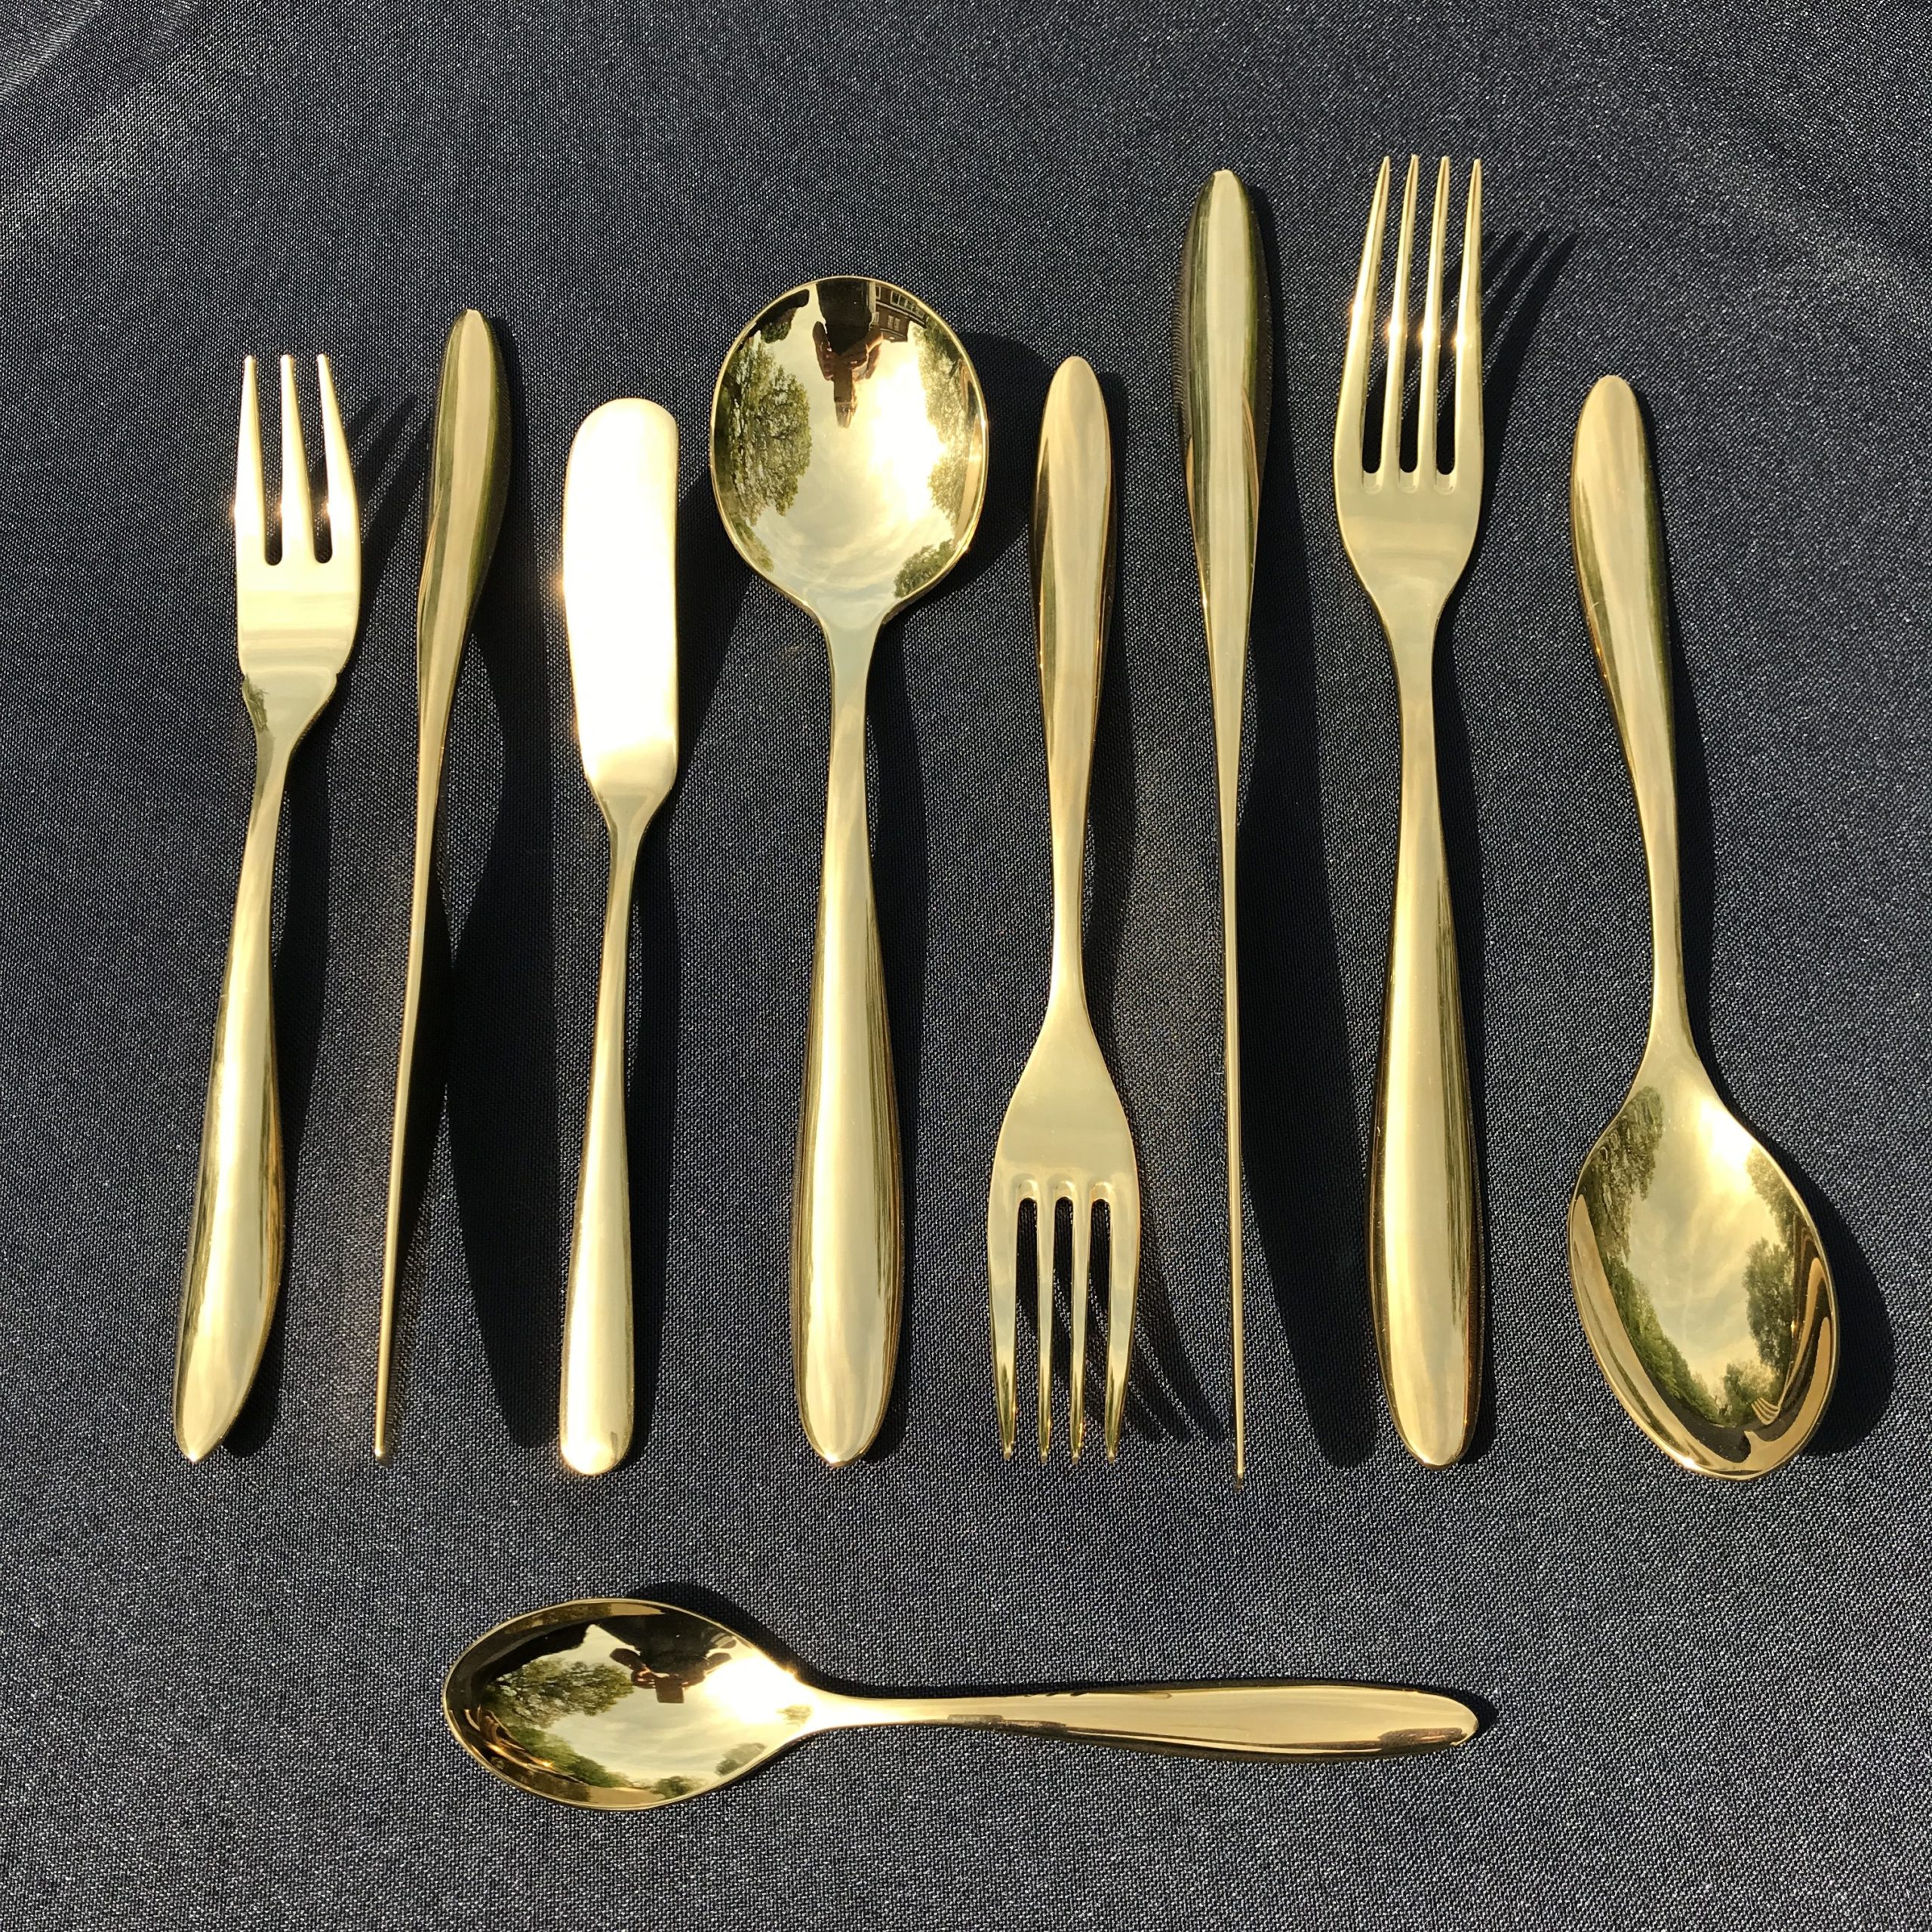 Gold Cutlery – The Luxe Touch